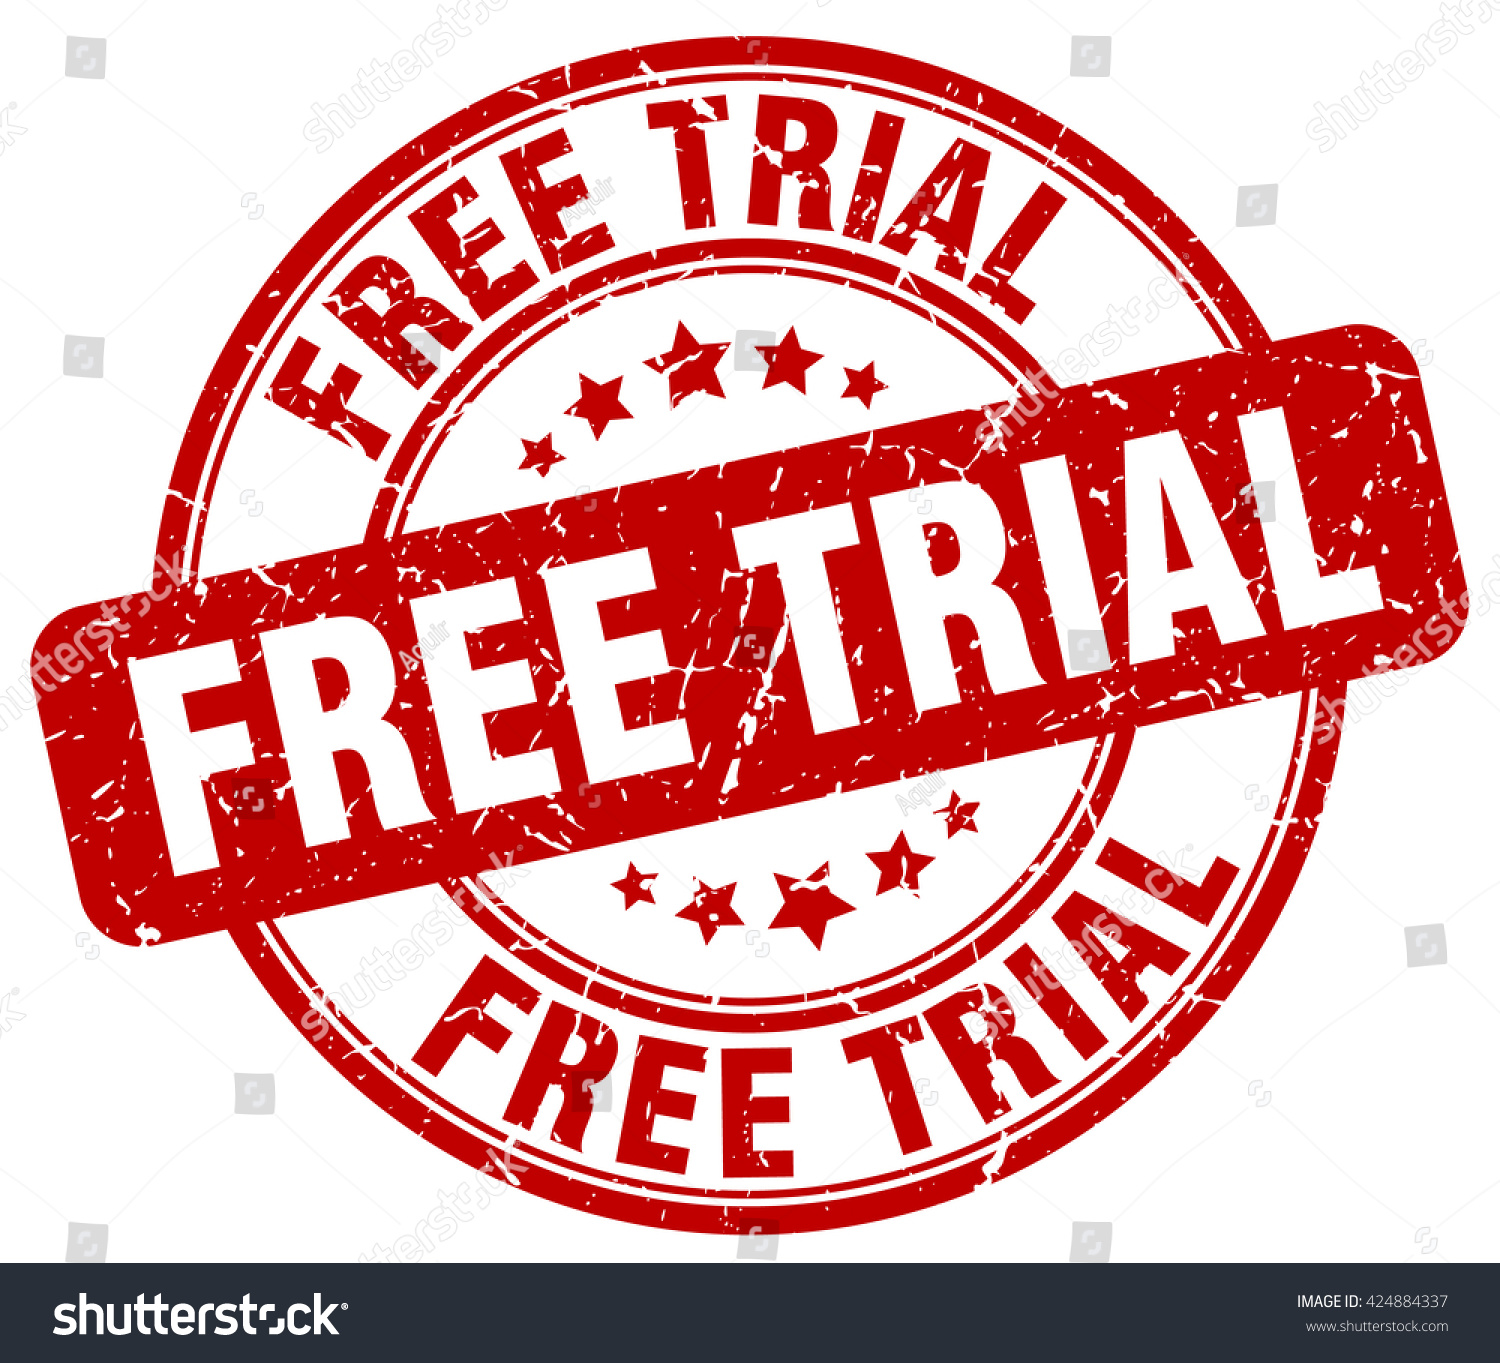 Try trial